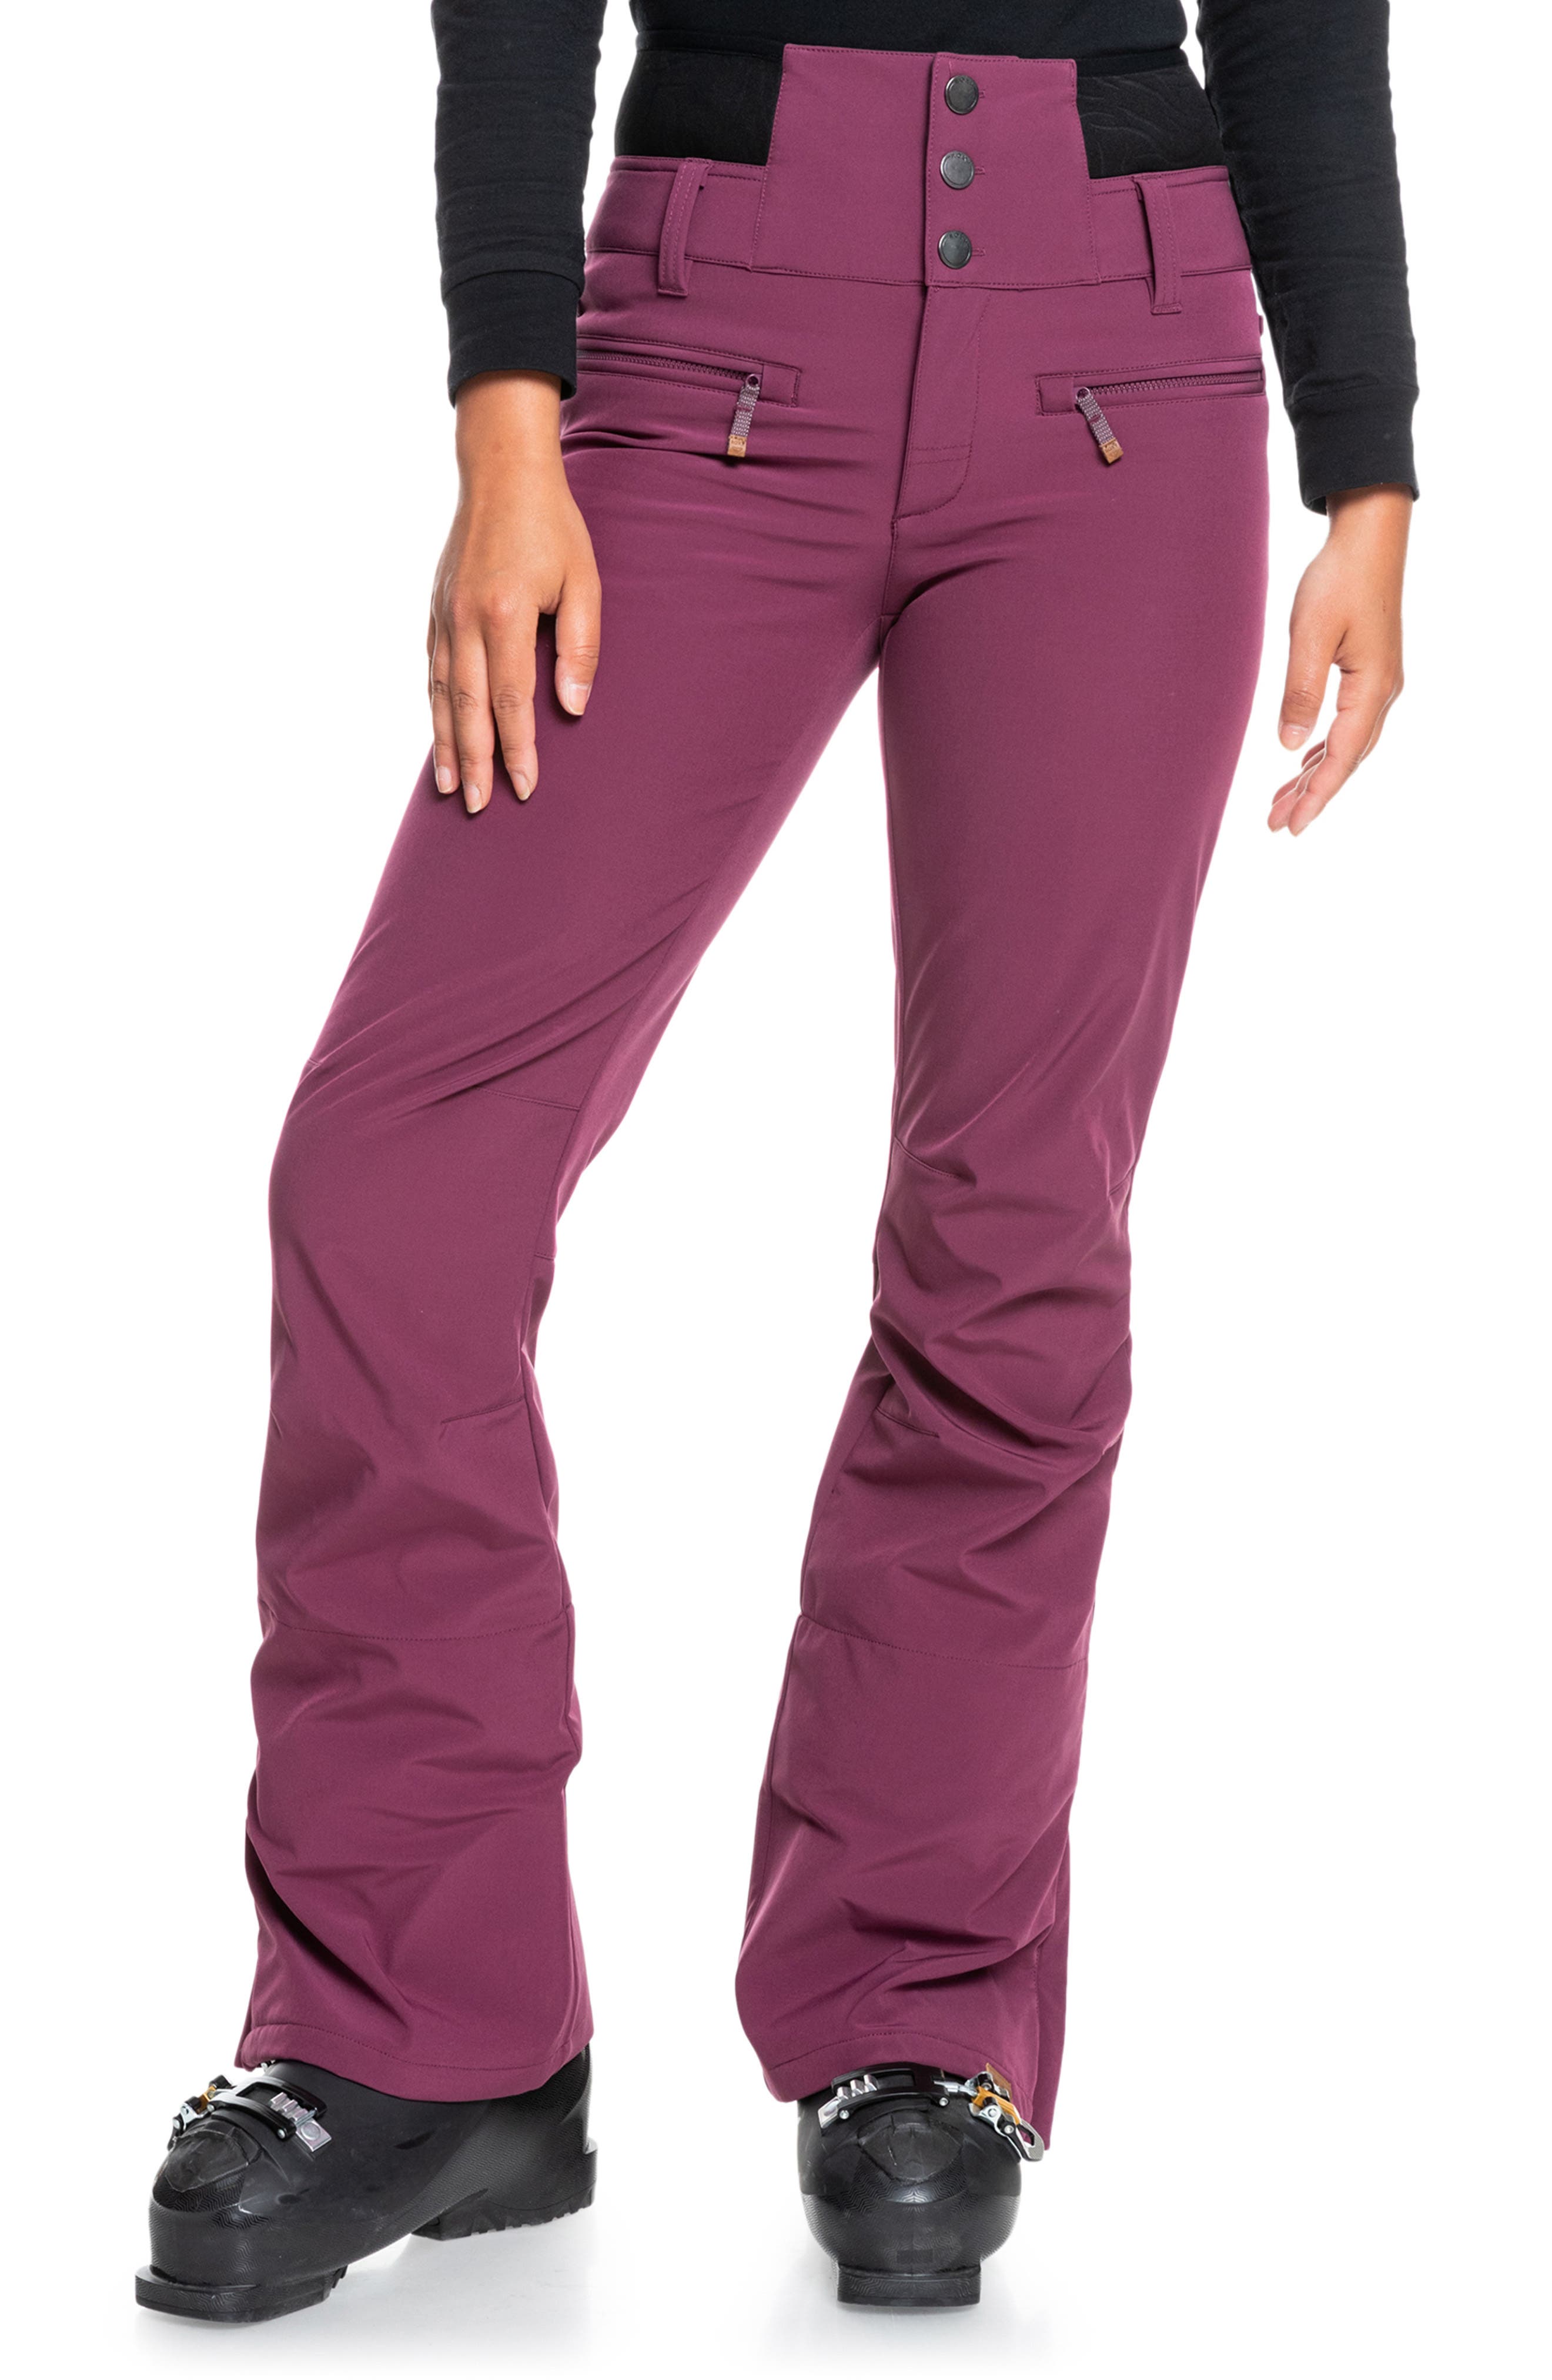 Roxy Womens Lead by The Slopes Pant